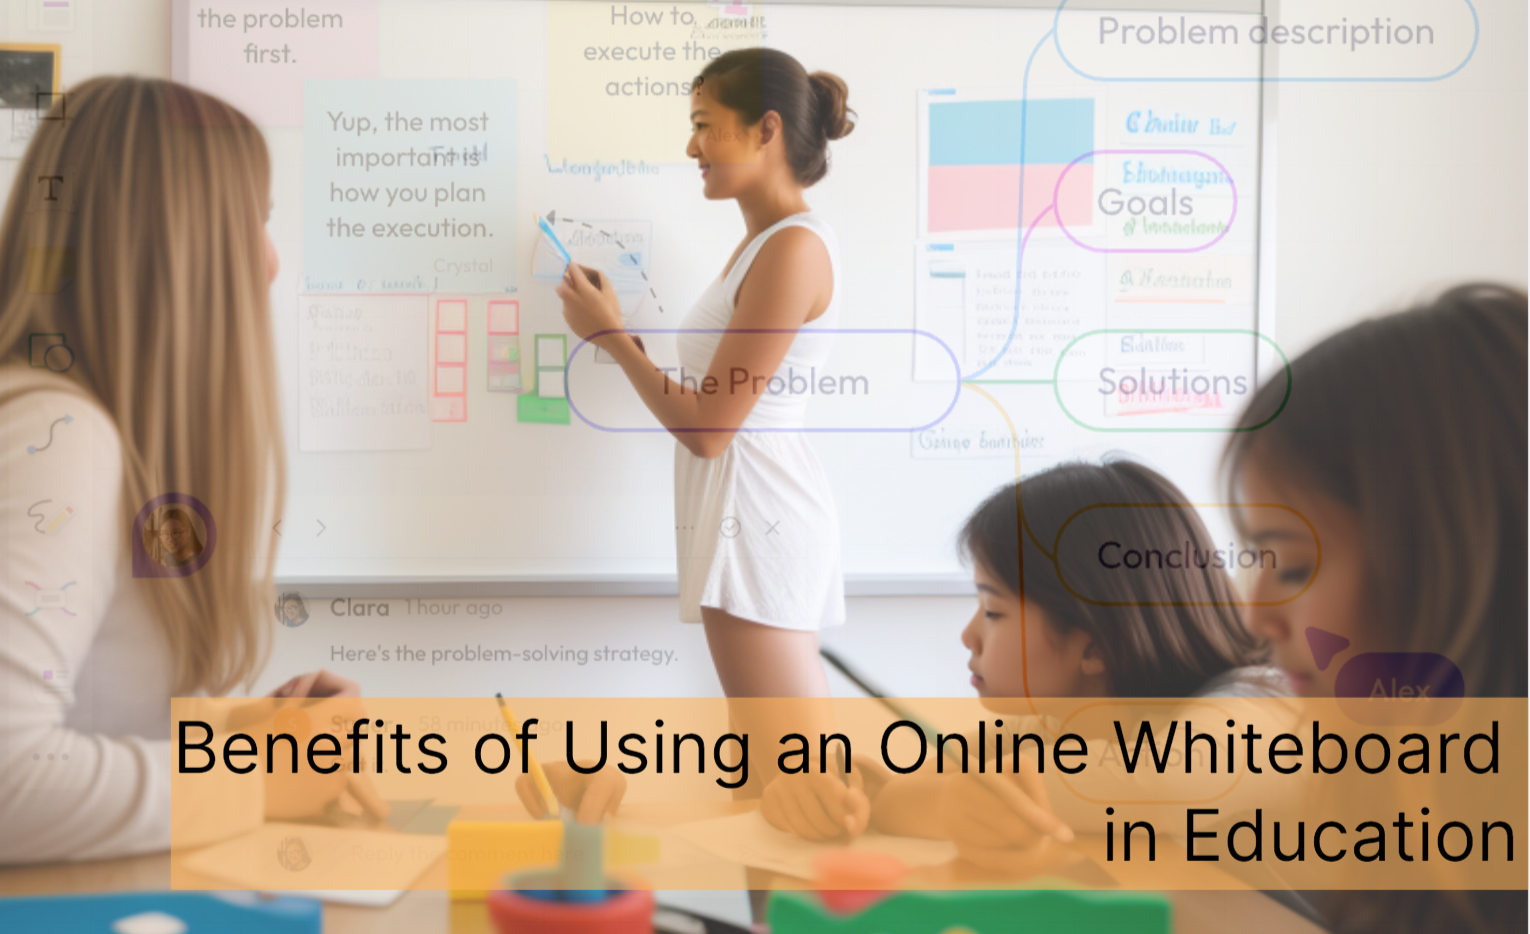 Benefits of Using an Online Whiteboard in Education